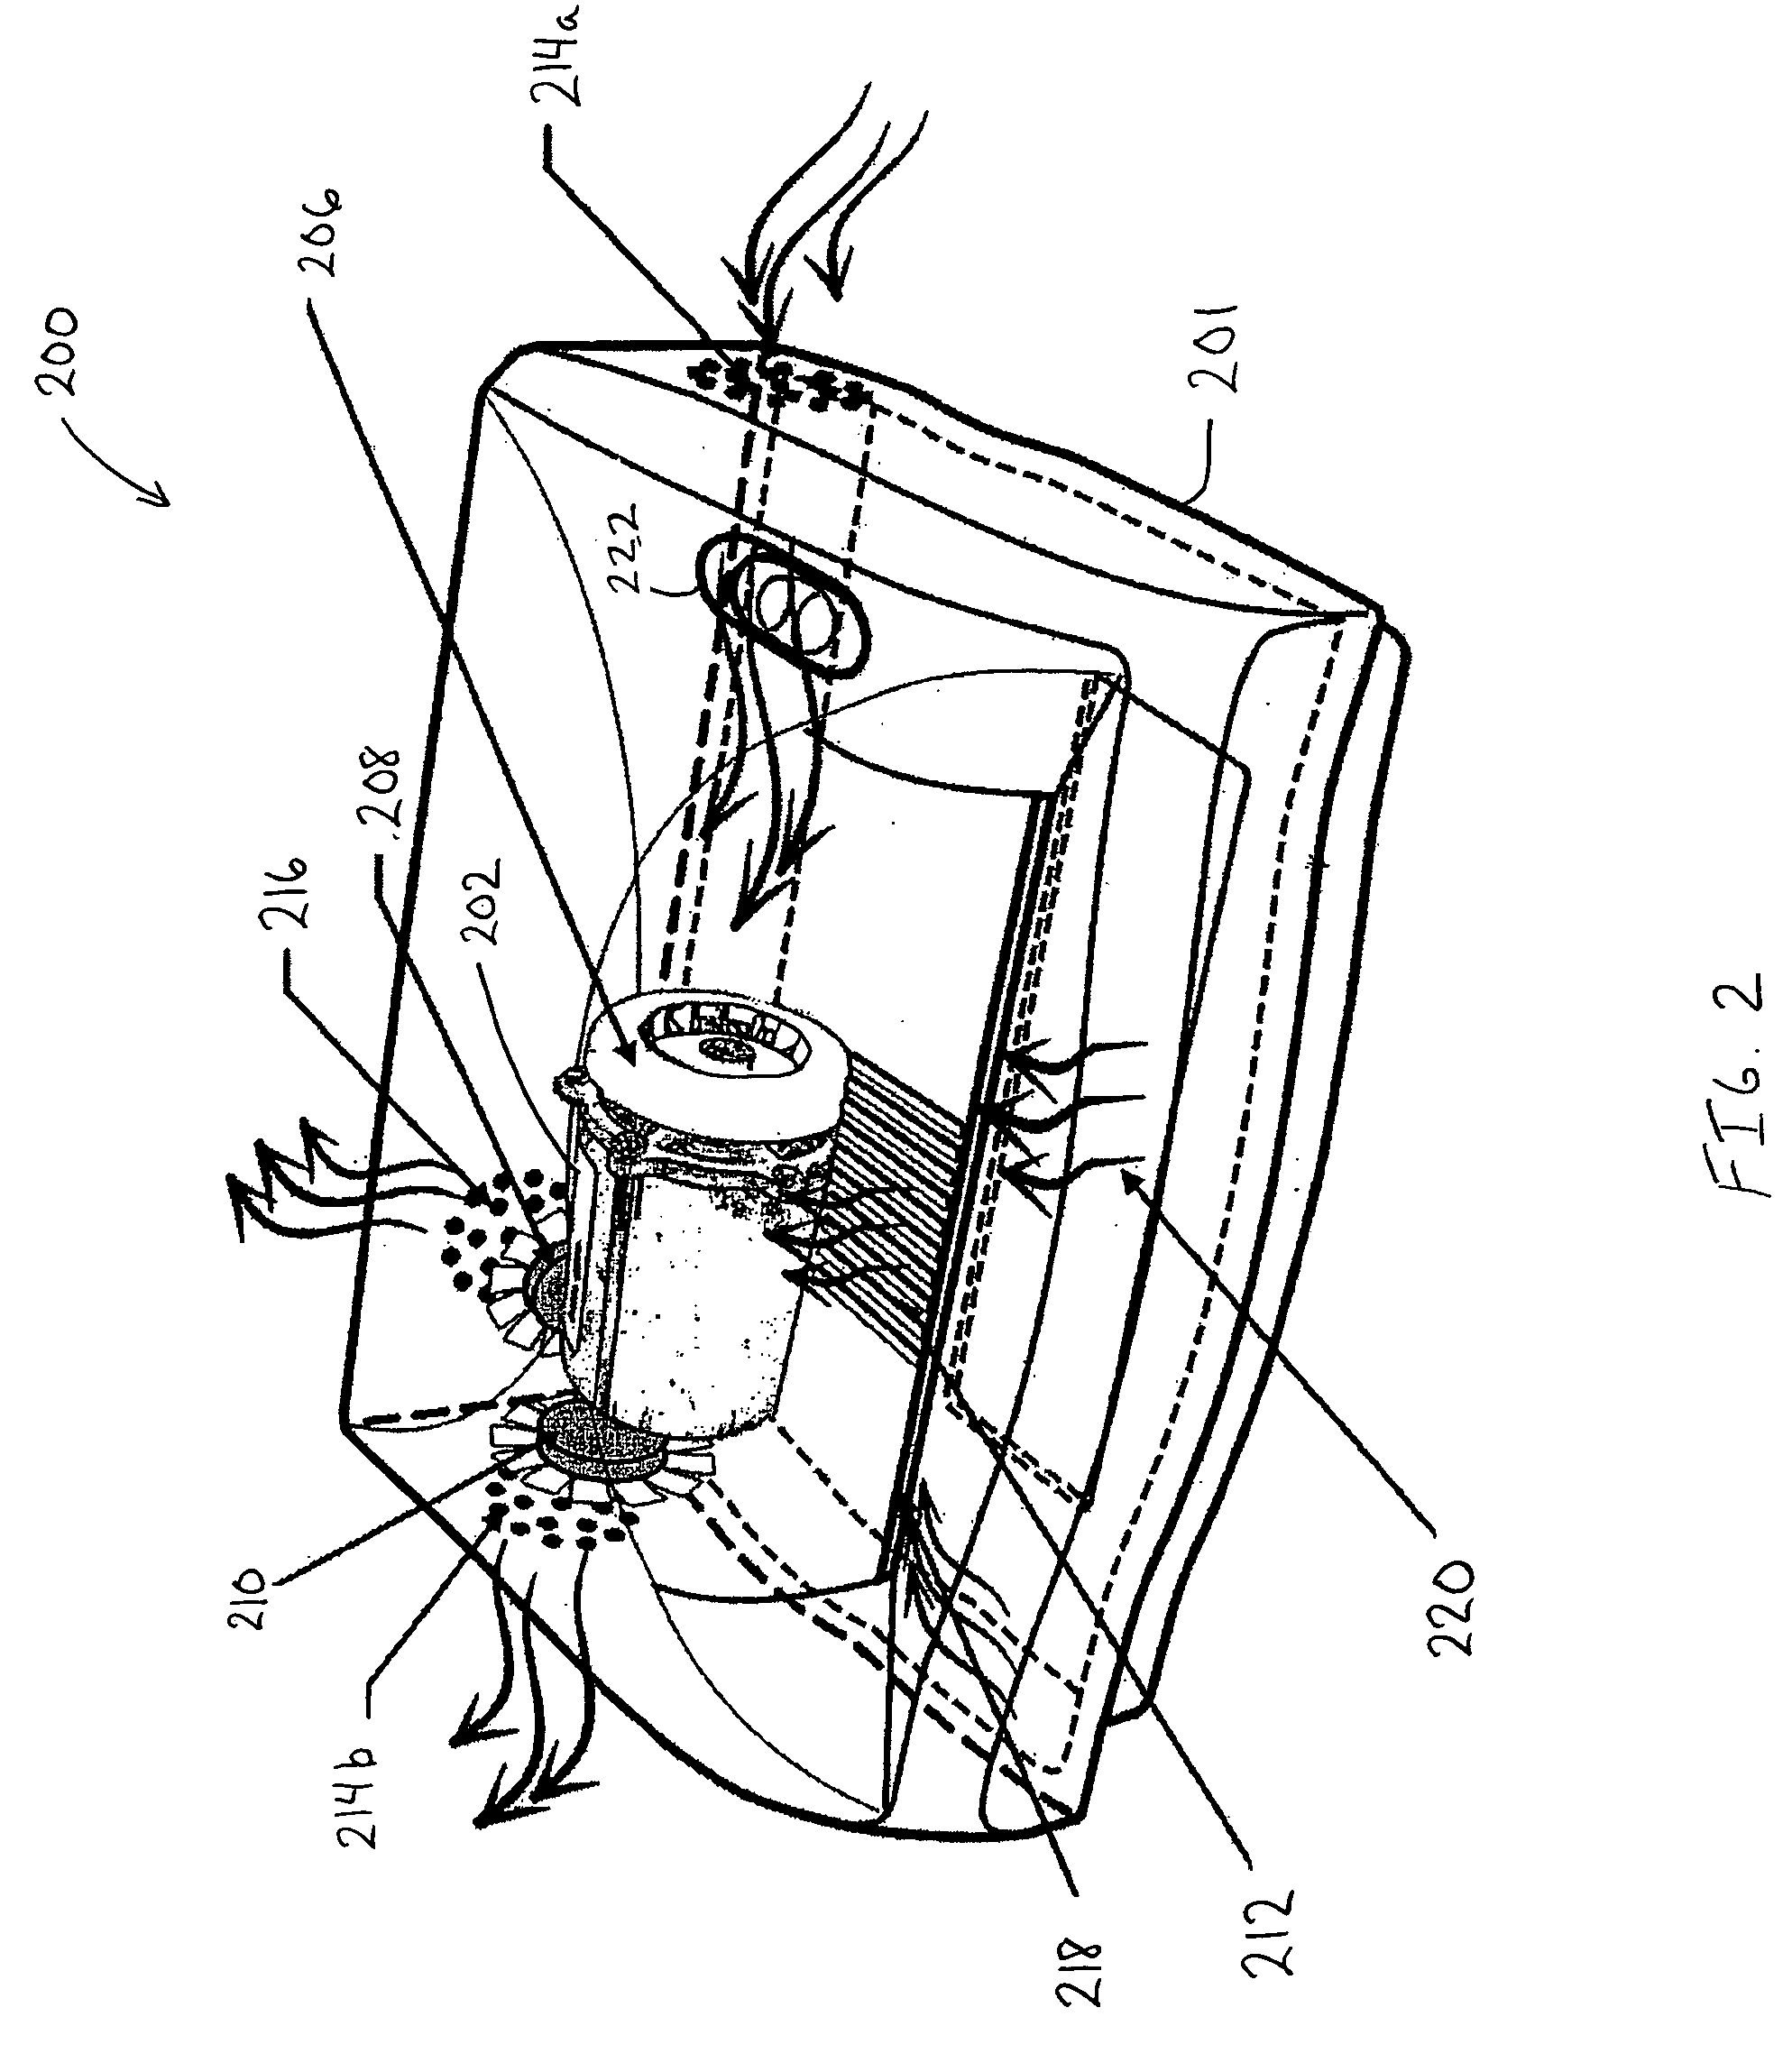 Systems and methods for thermal regulation of shredding device